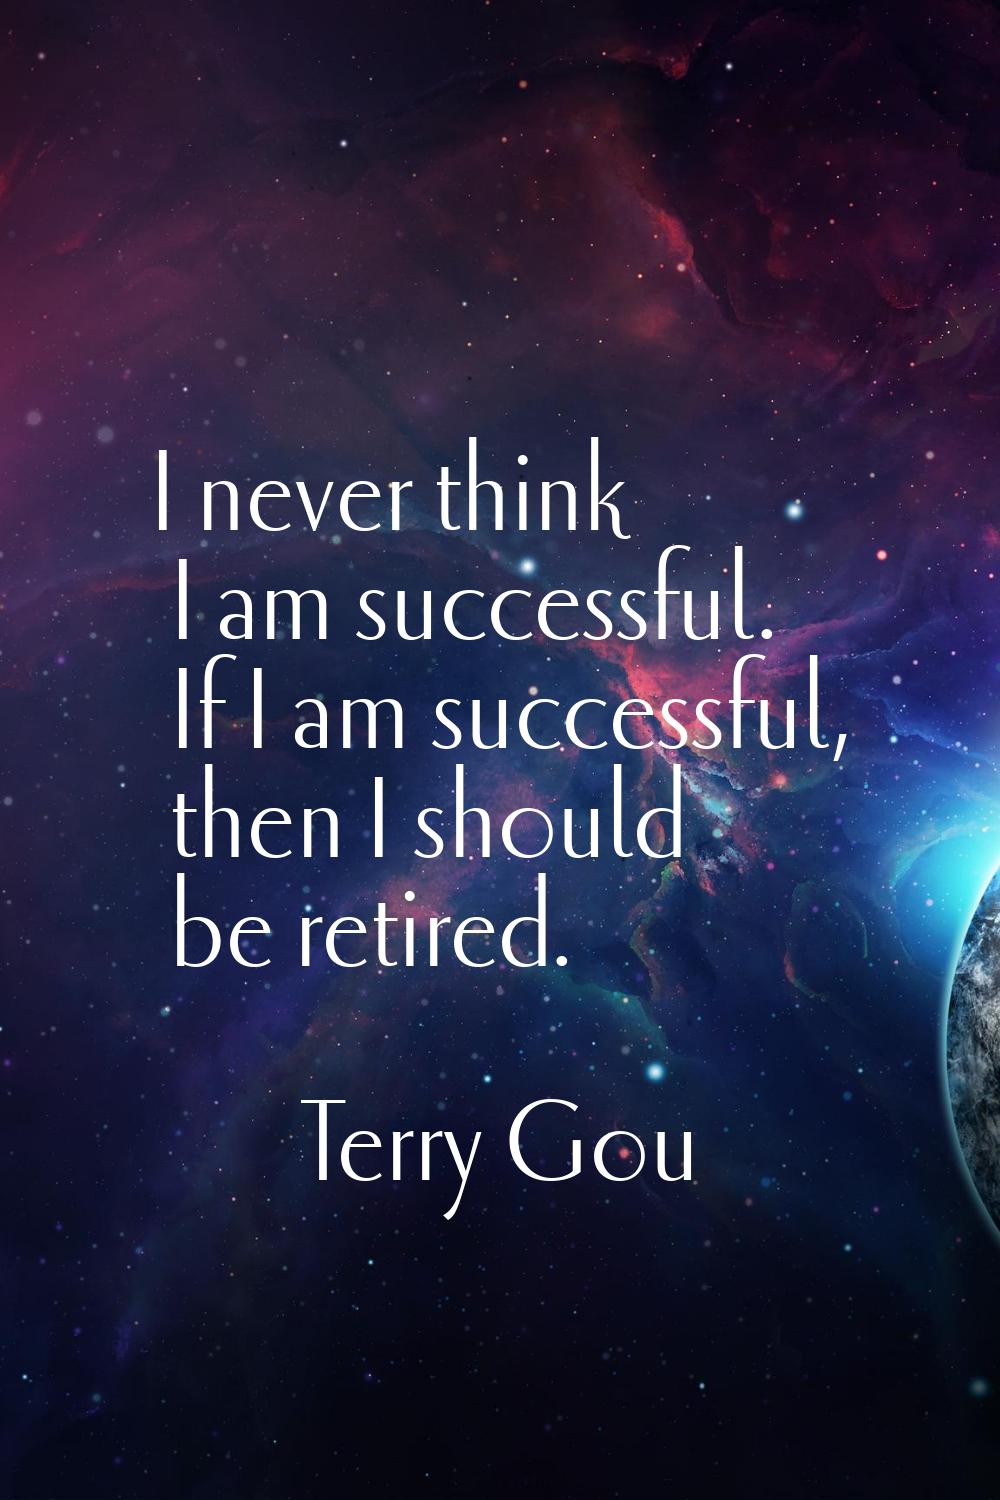 I never think I am successful. If I am successful, then I should be retired.